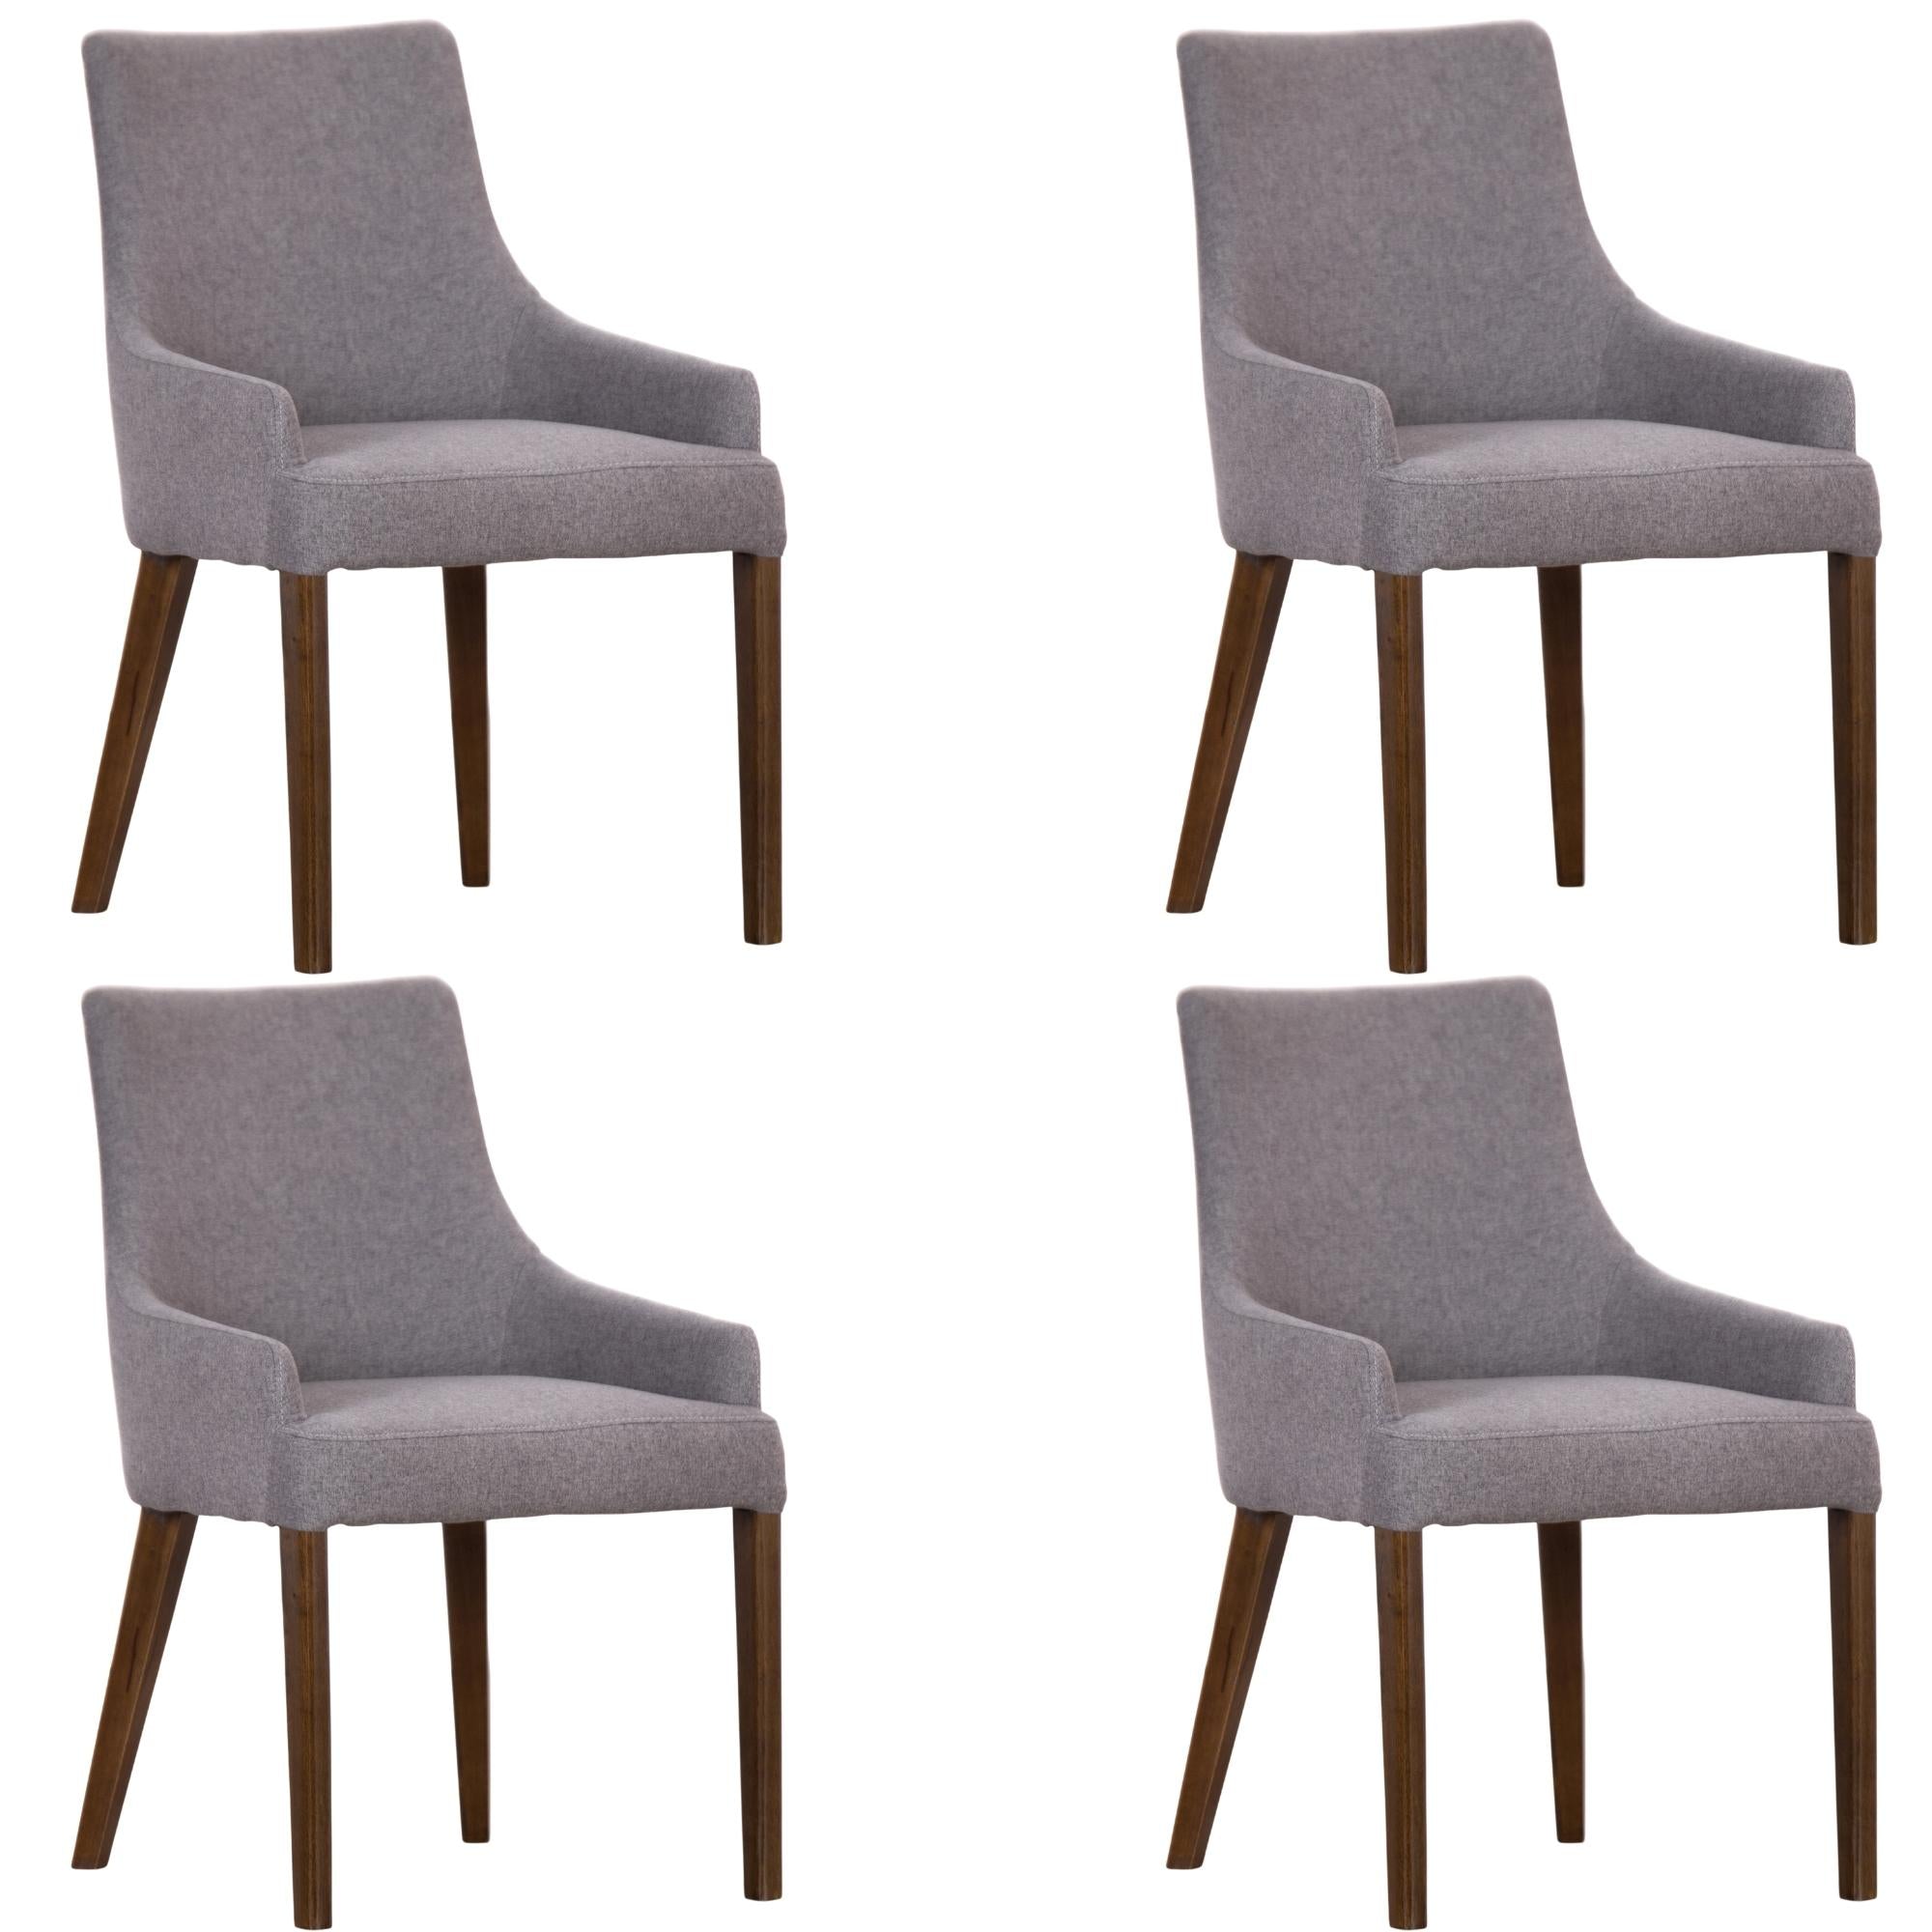 Tuberose Dining Chair Set of 4 Fabric Seat Solid Acacia Wood Furniture - Grey Deals499